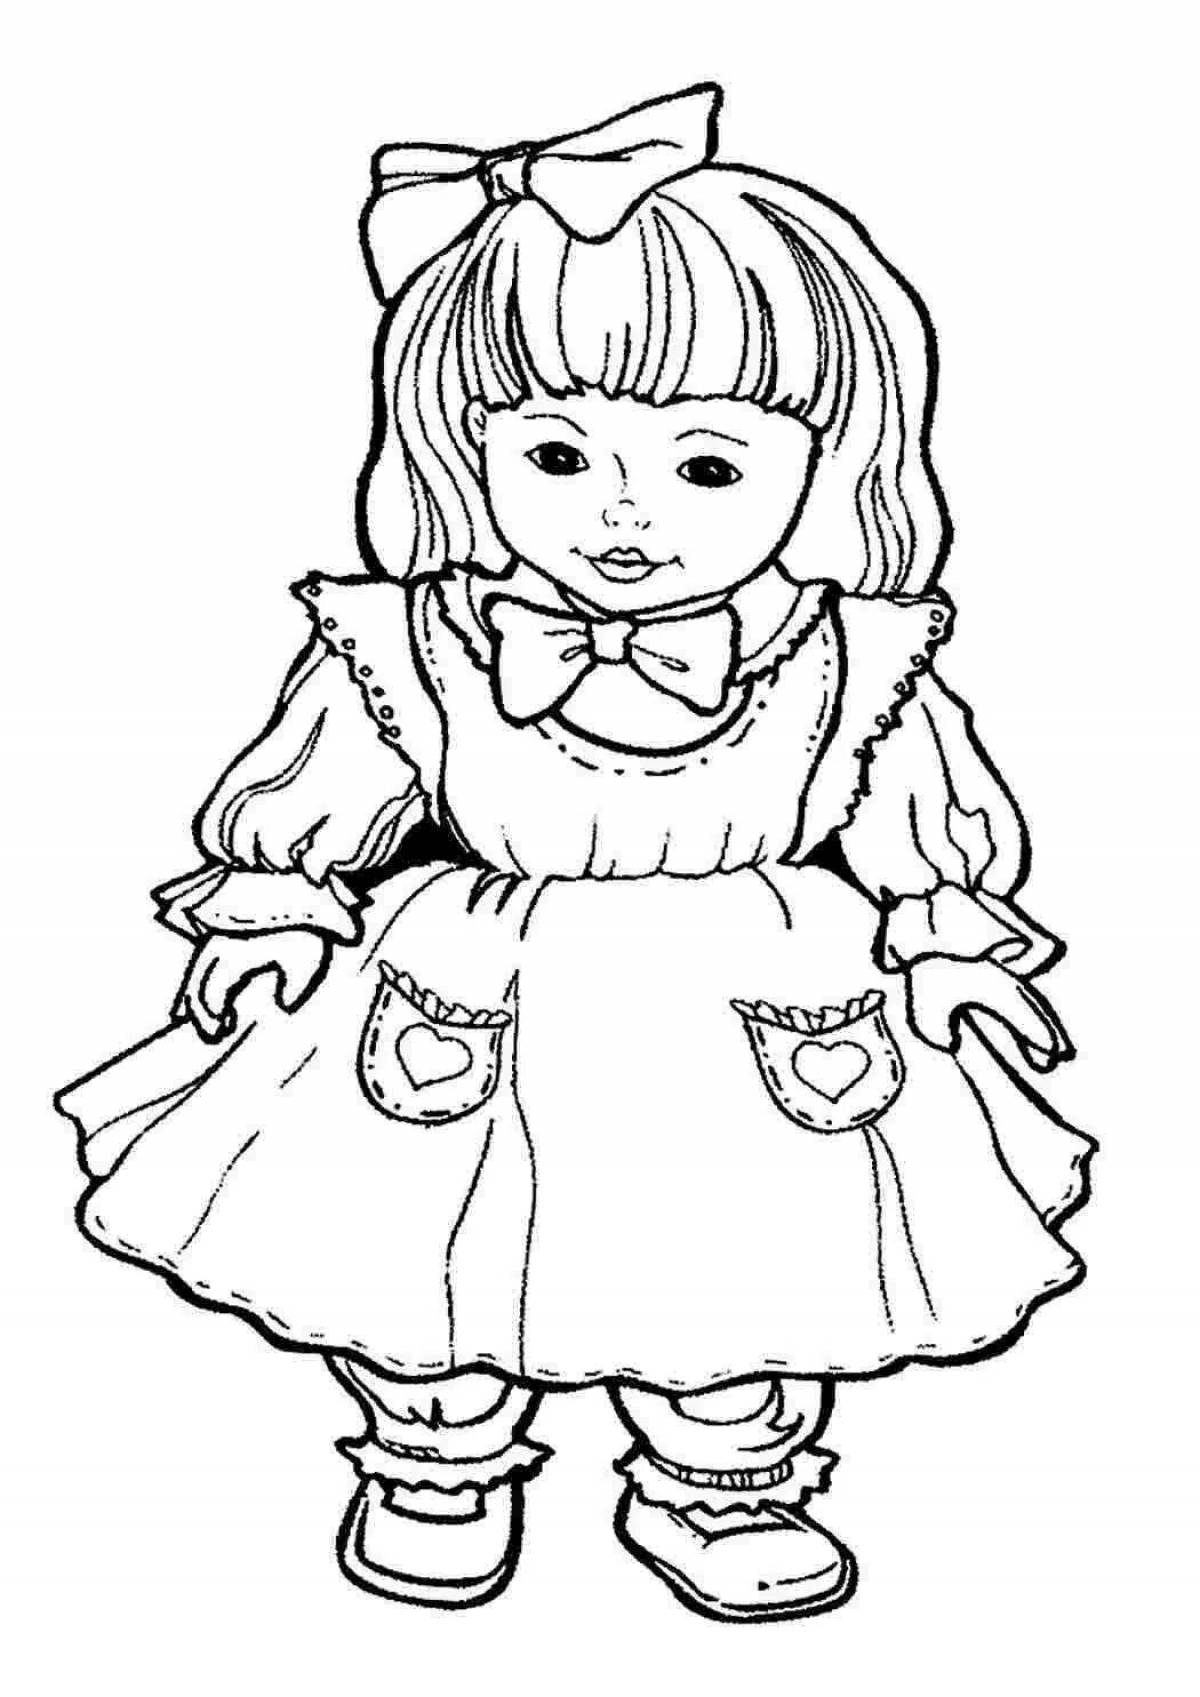 Coloring page magic doll